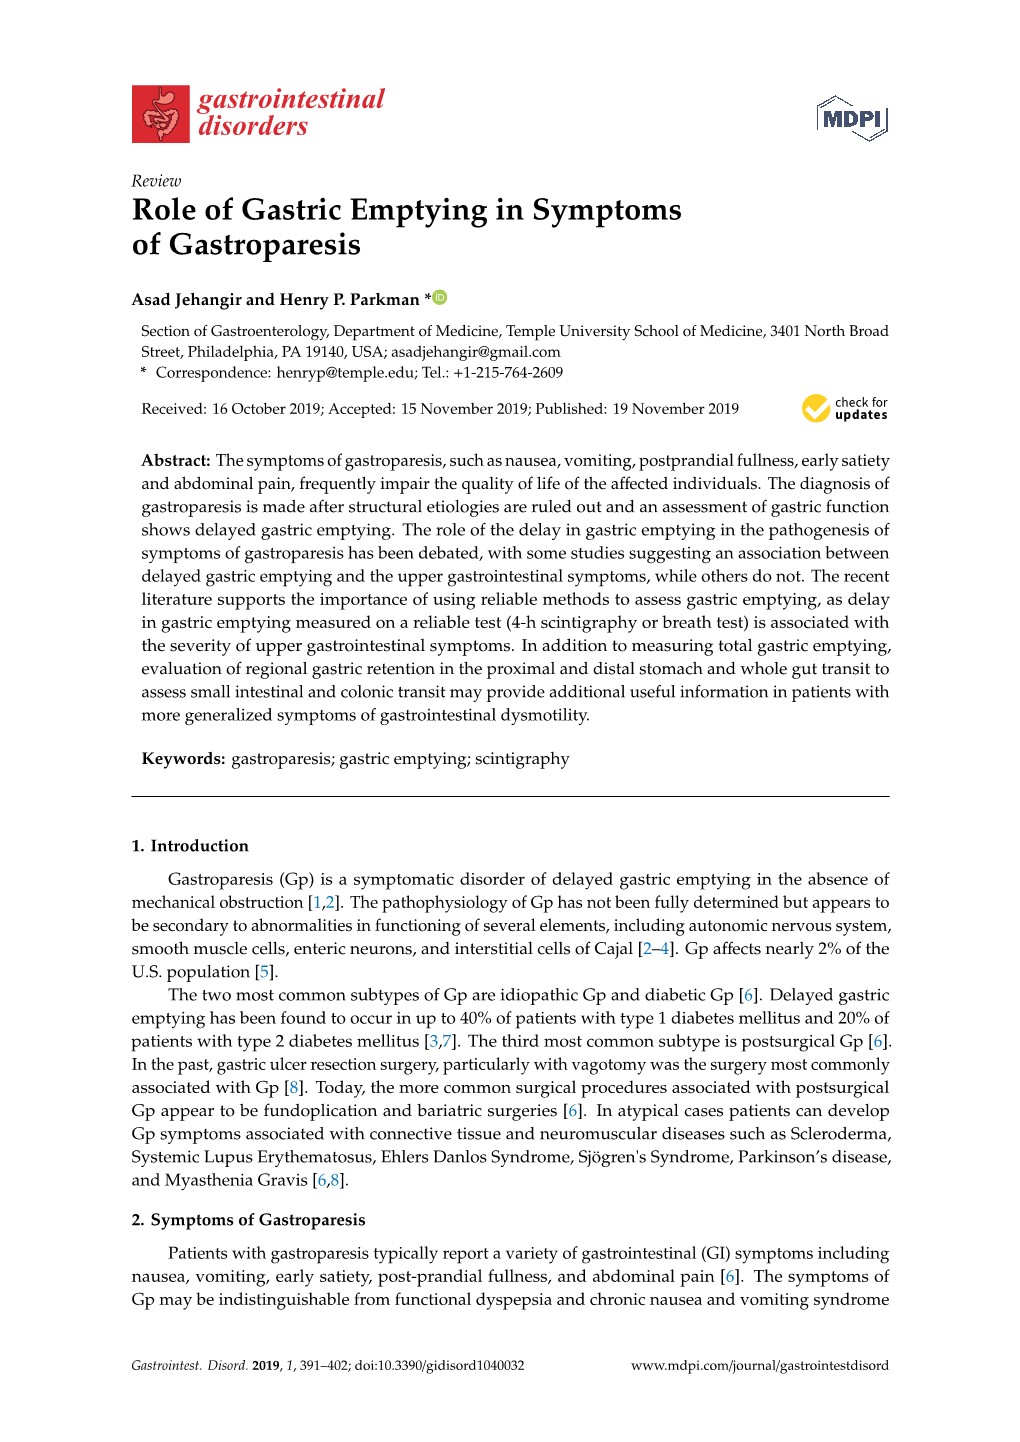 Role of Gastric Emptying in Symptoms of Gastroparesis